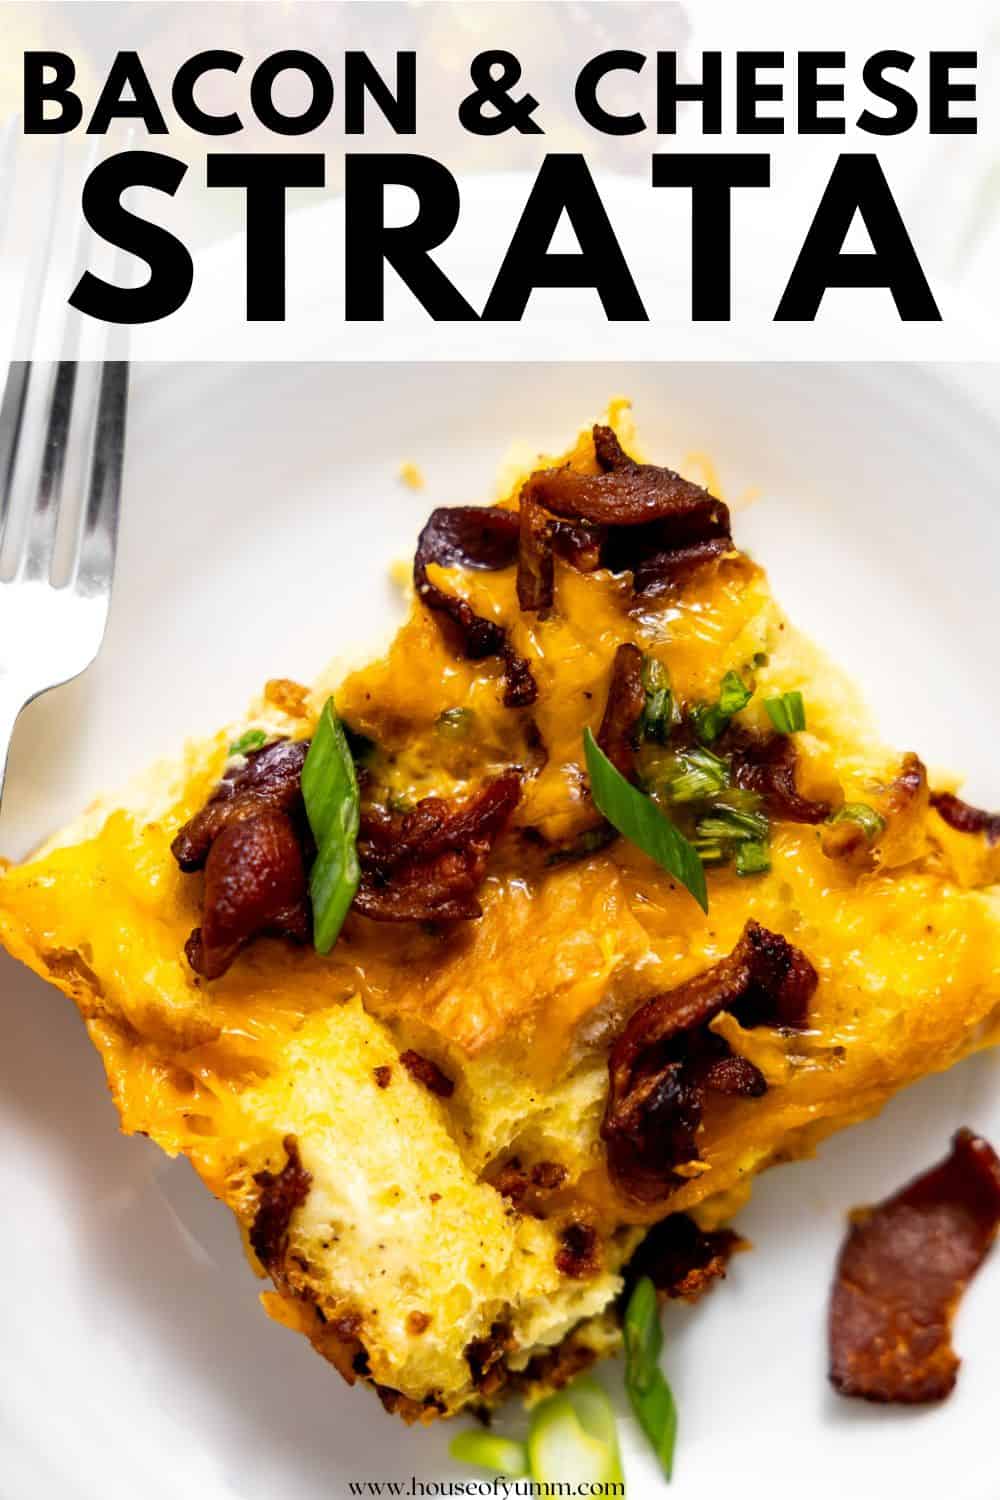 Bacon Strata with text.